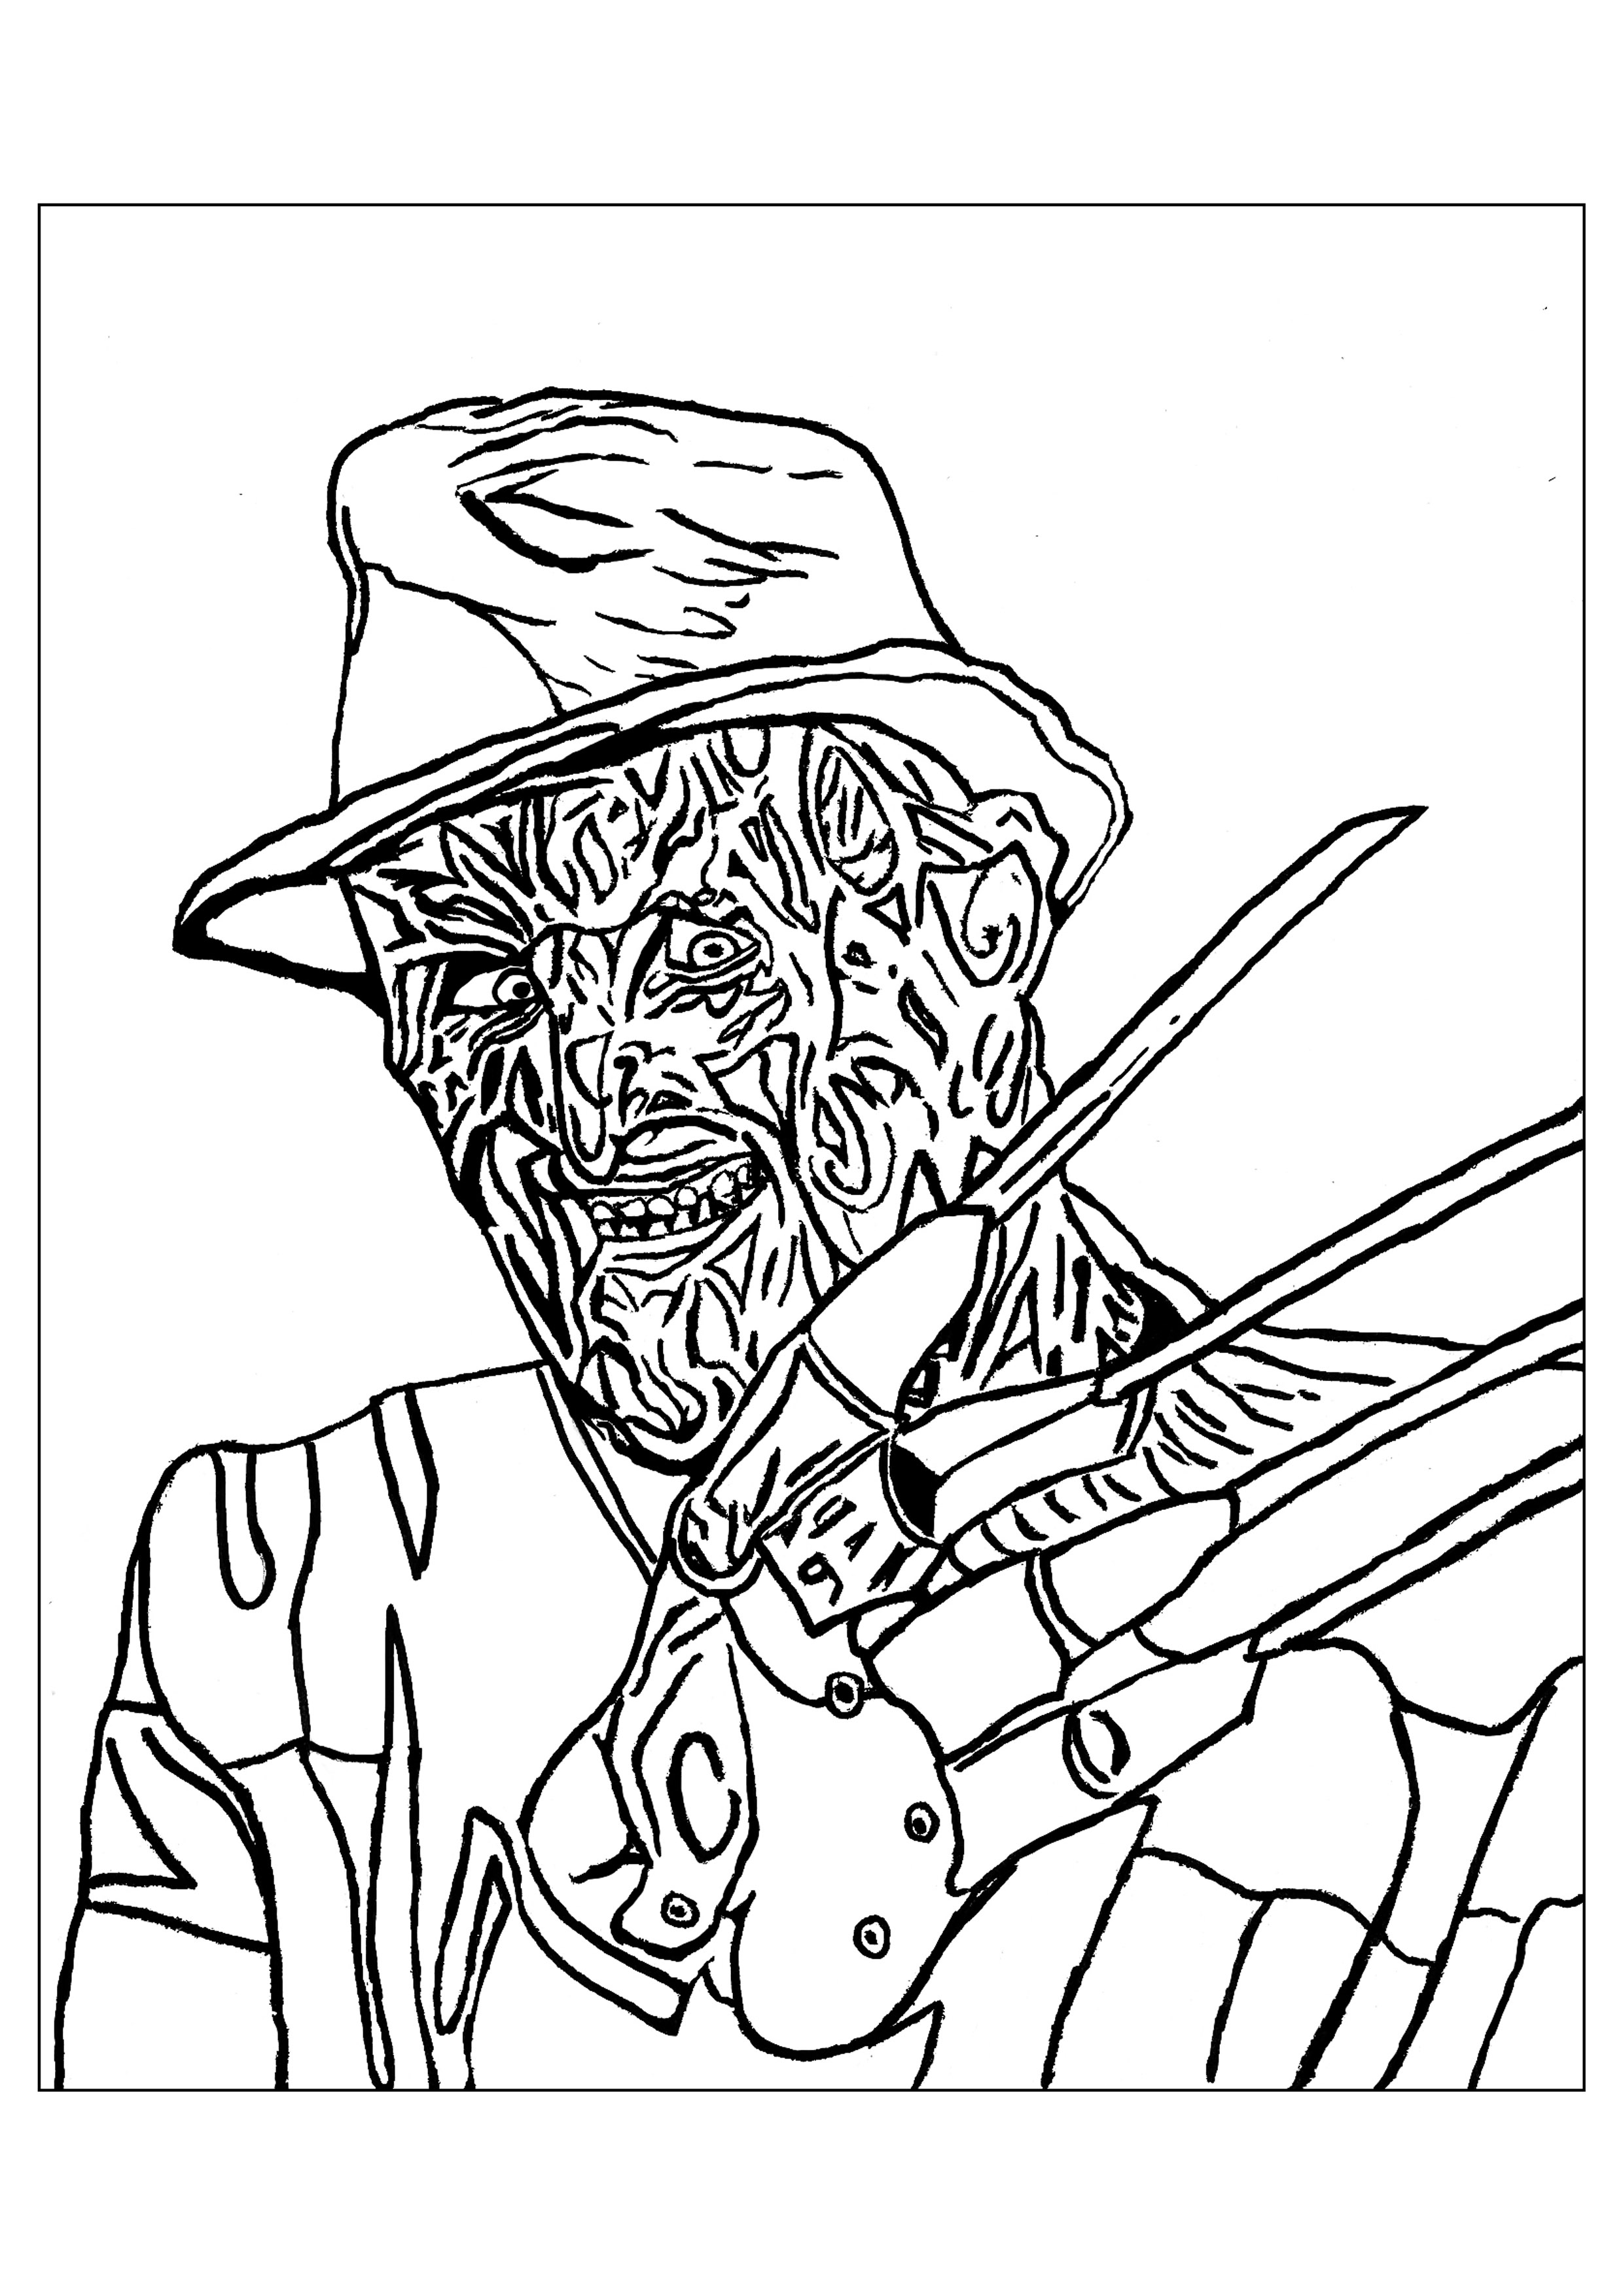 A scary coloring page of Freddy Krueger, perfect for Halloween